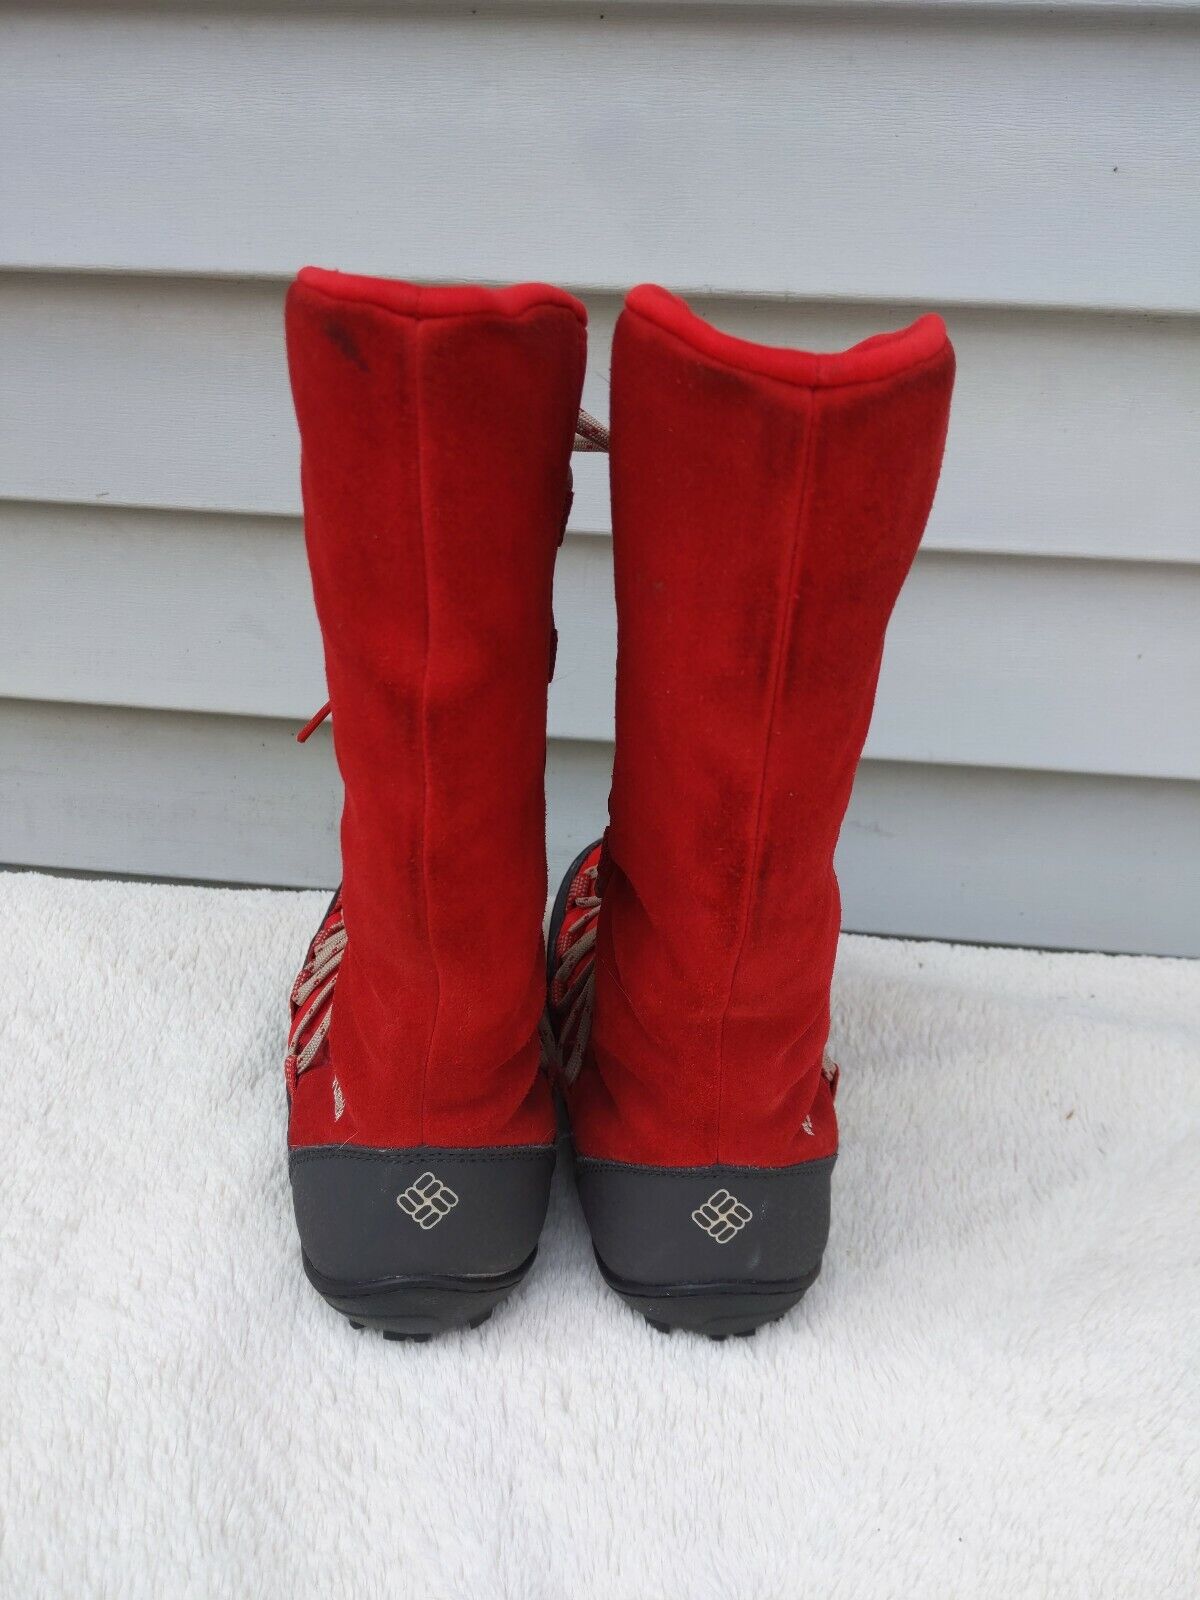 Columbia Kids 2 Loveland Omni Heat Snow Boots Boot Red Shoes Winter Lace Up